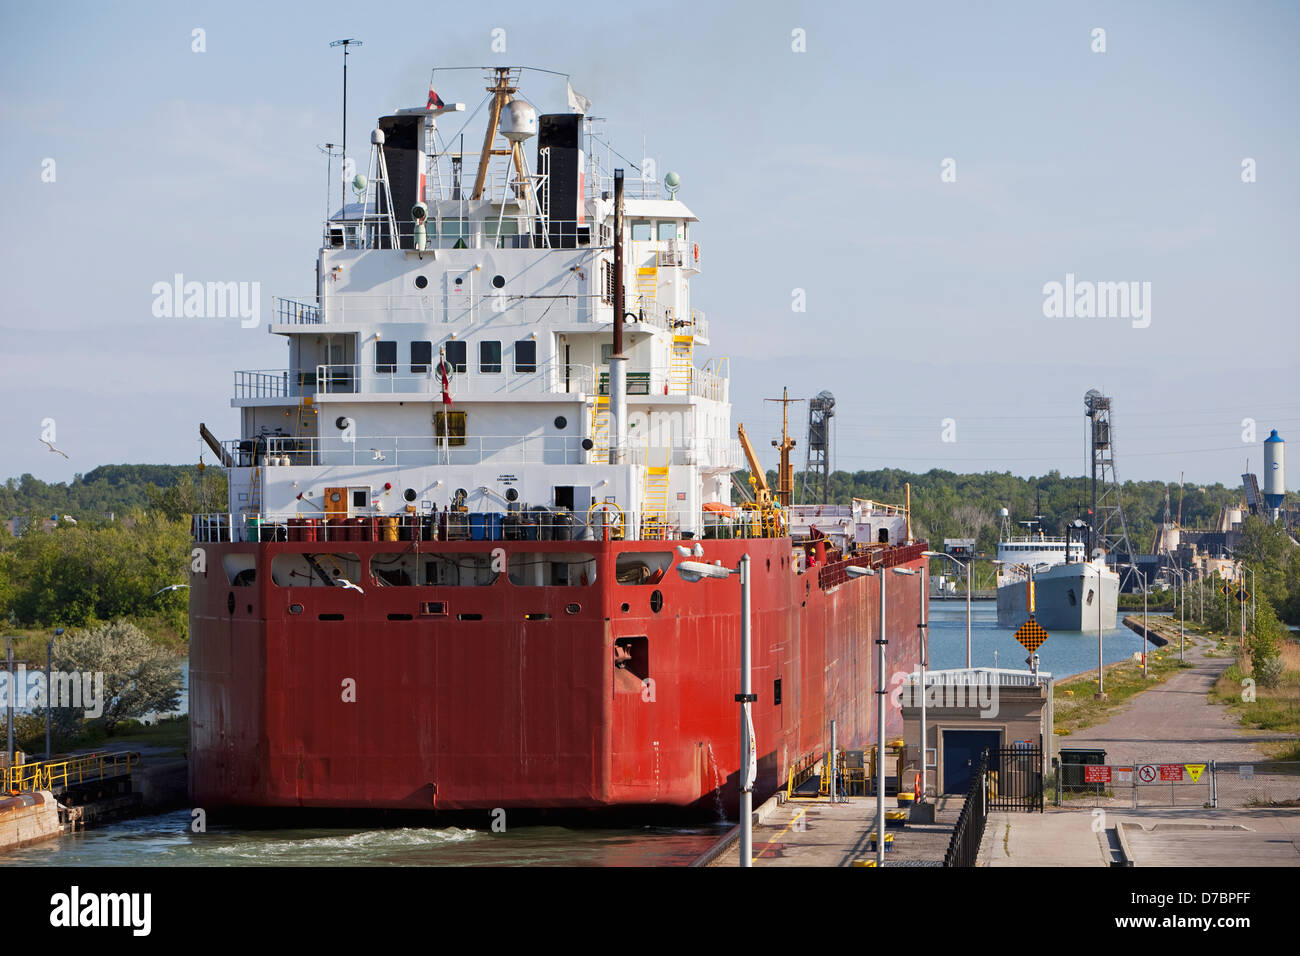 A Self-Unloading Bulk Freighter And A Cement Carrier At Lock 3 Of The Welland Canal;St. Catharines Ontario Canada Stock Photo